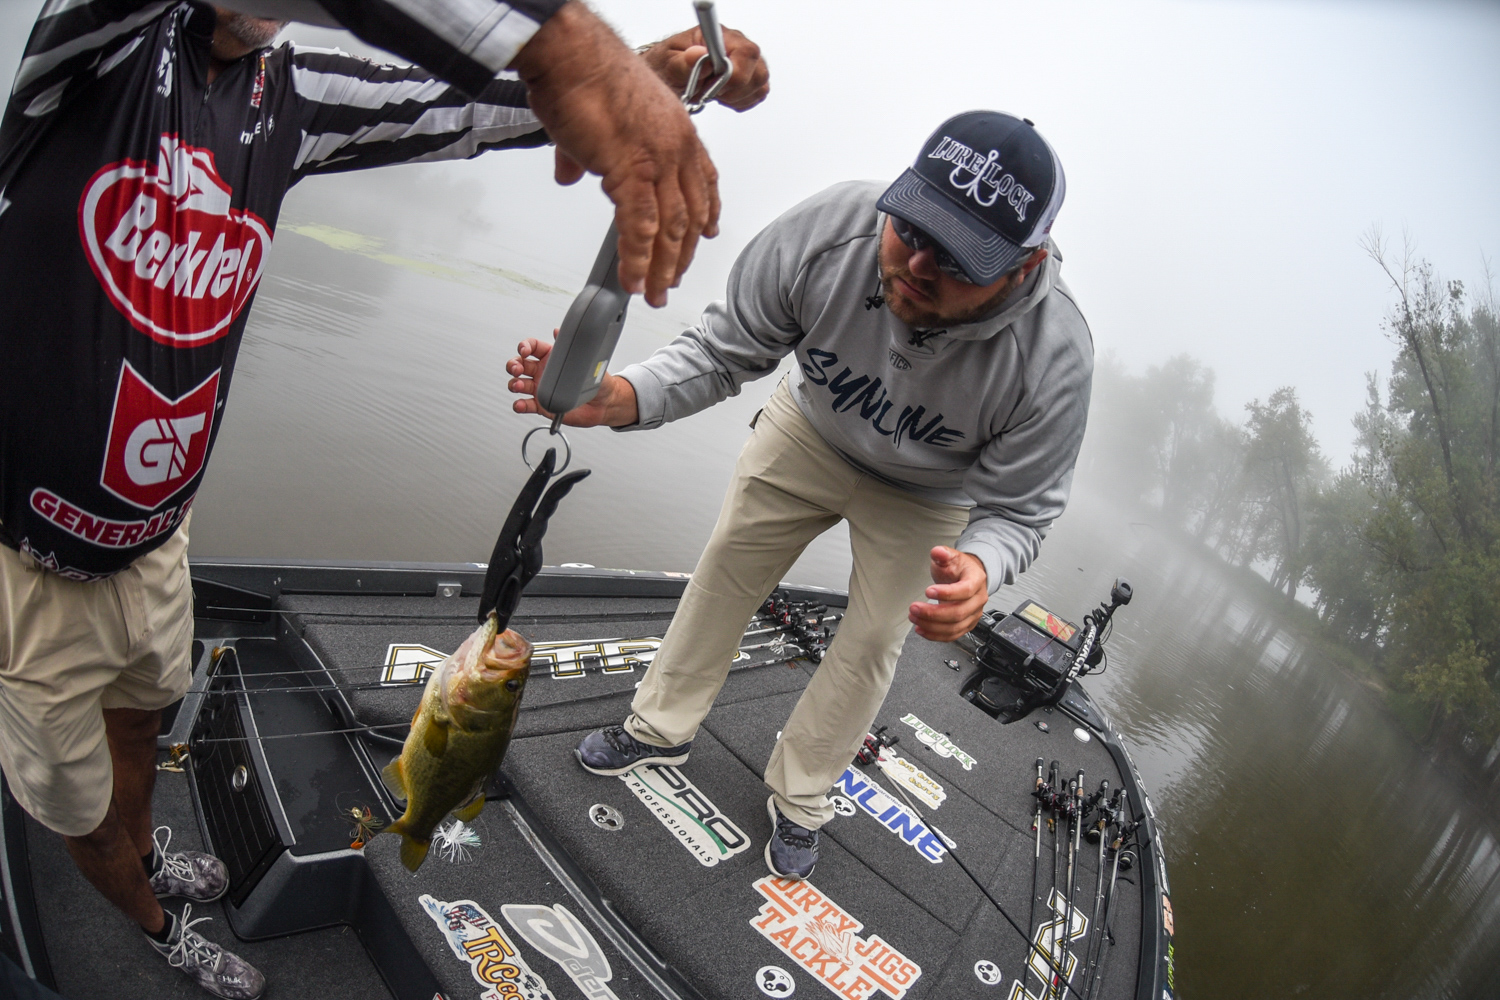 Michael Neal weighs his catch. Photo by Garrick Dixon